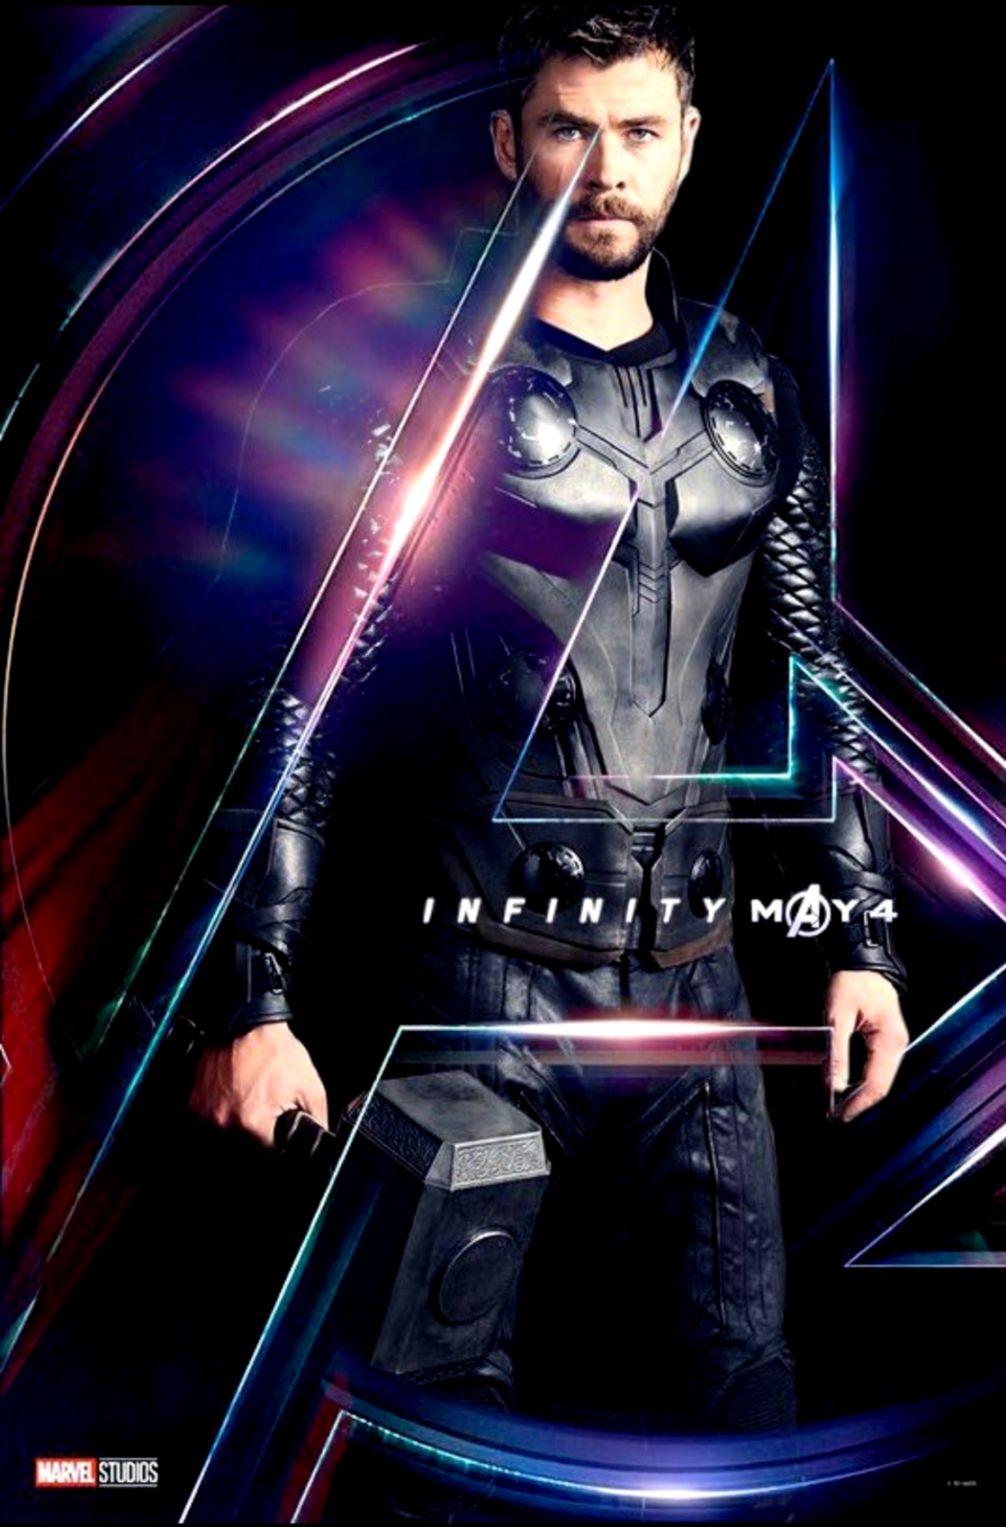 Chris Hemsworth As Thor In The Avengers Wallpaper. Copy